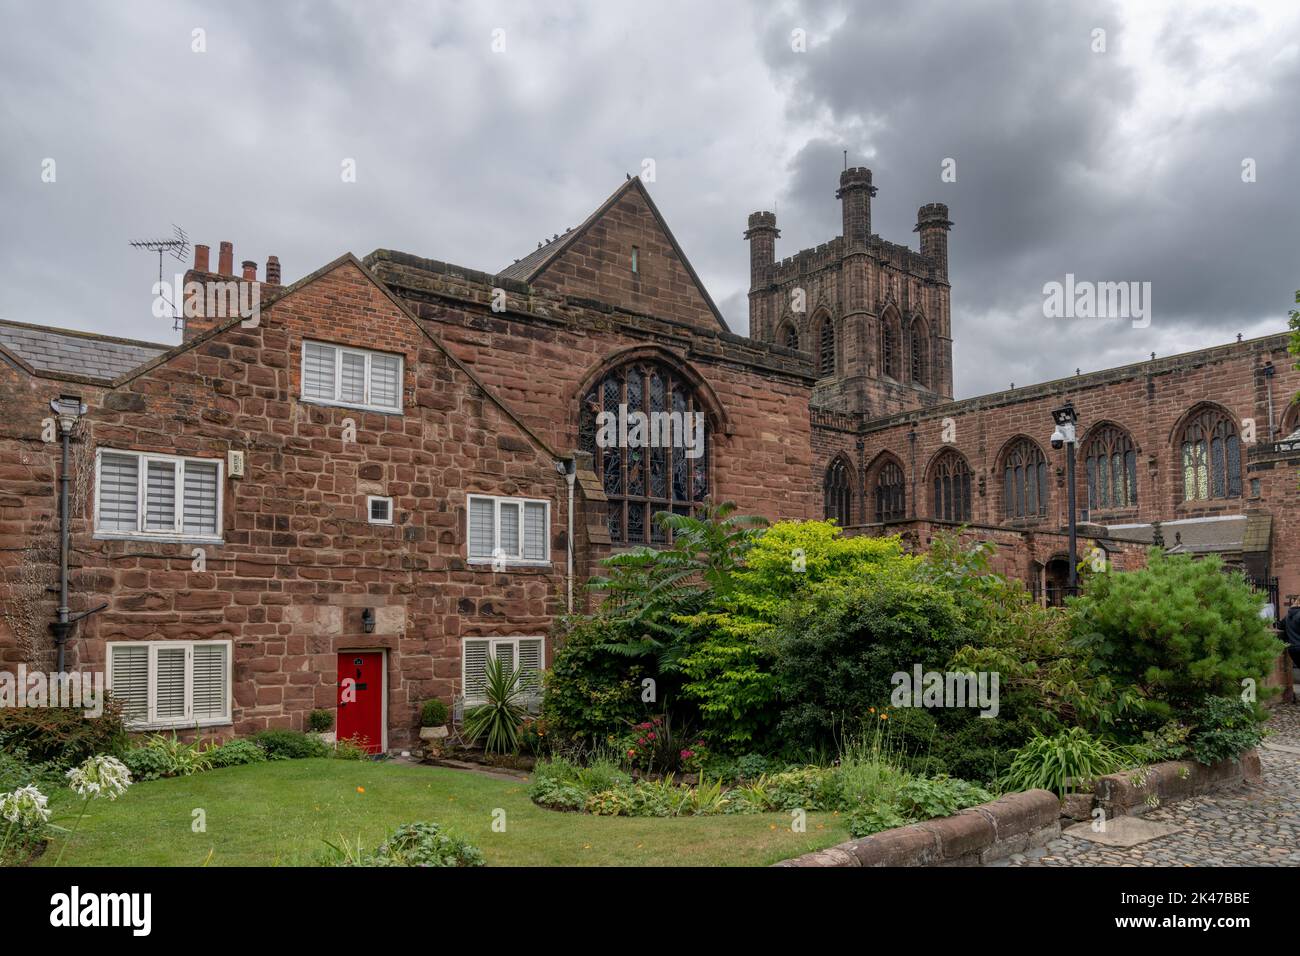 Chester, United Kingdom - 26 August, 2022: downtown Chester in Cheshire with its historic red brick buildings and the 12th-century cathedral in the ba Stock Photo